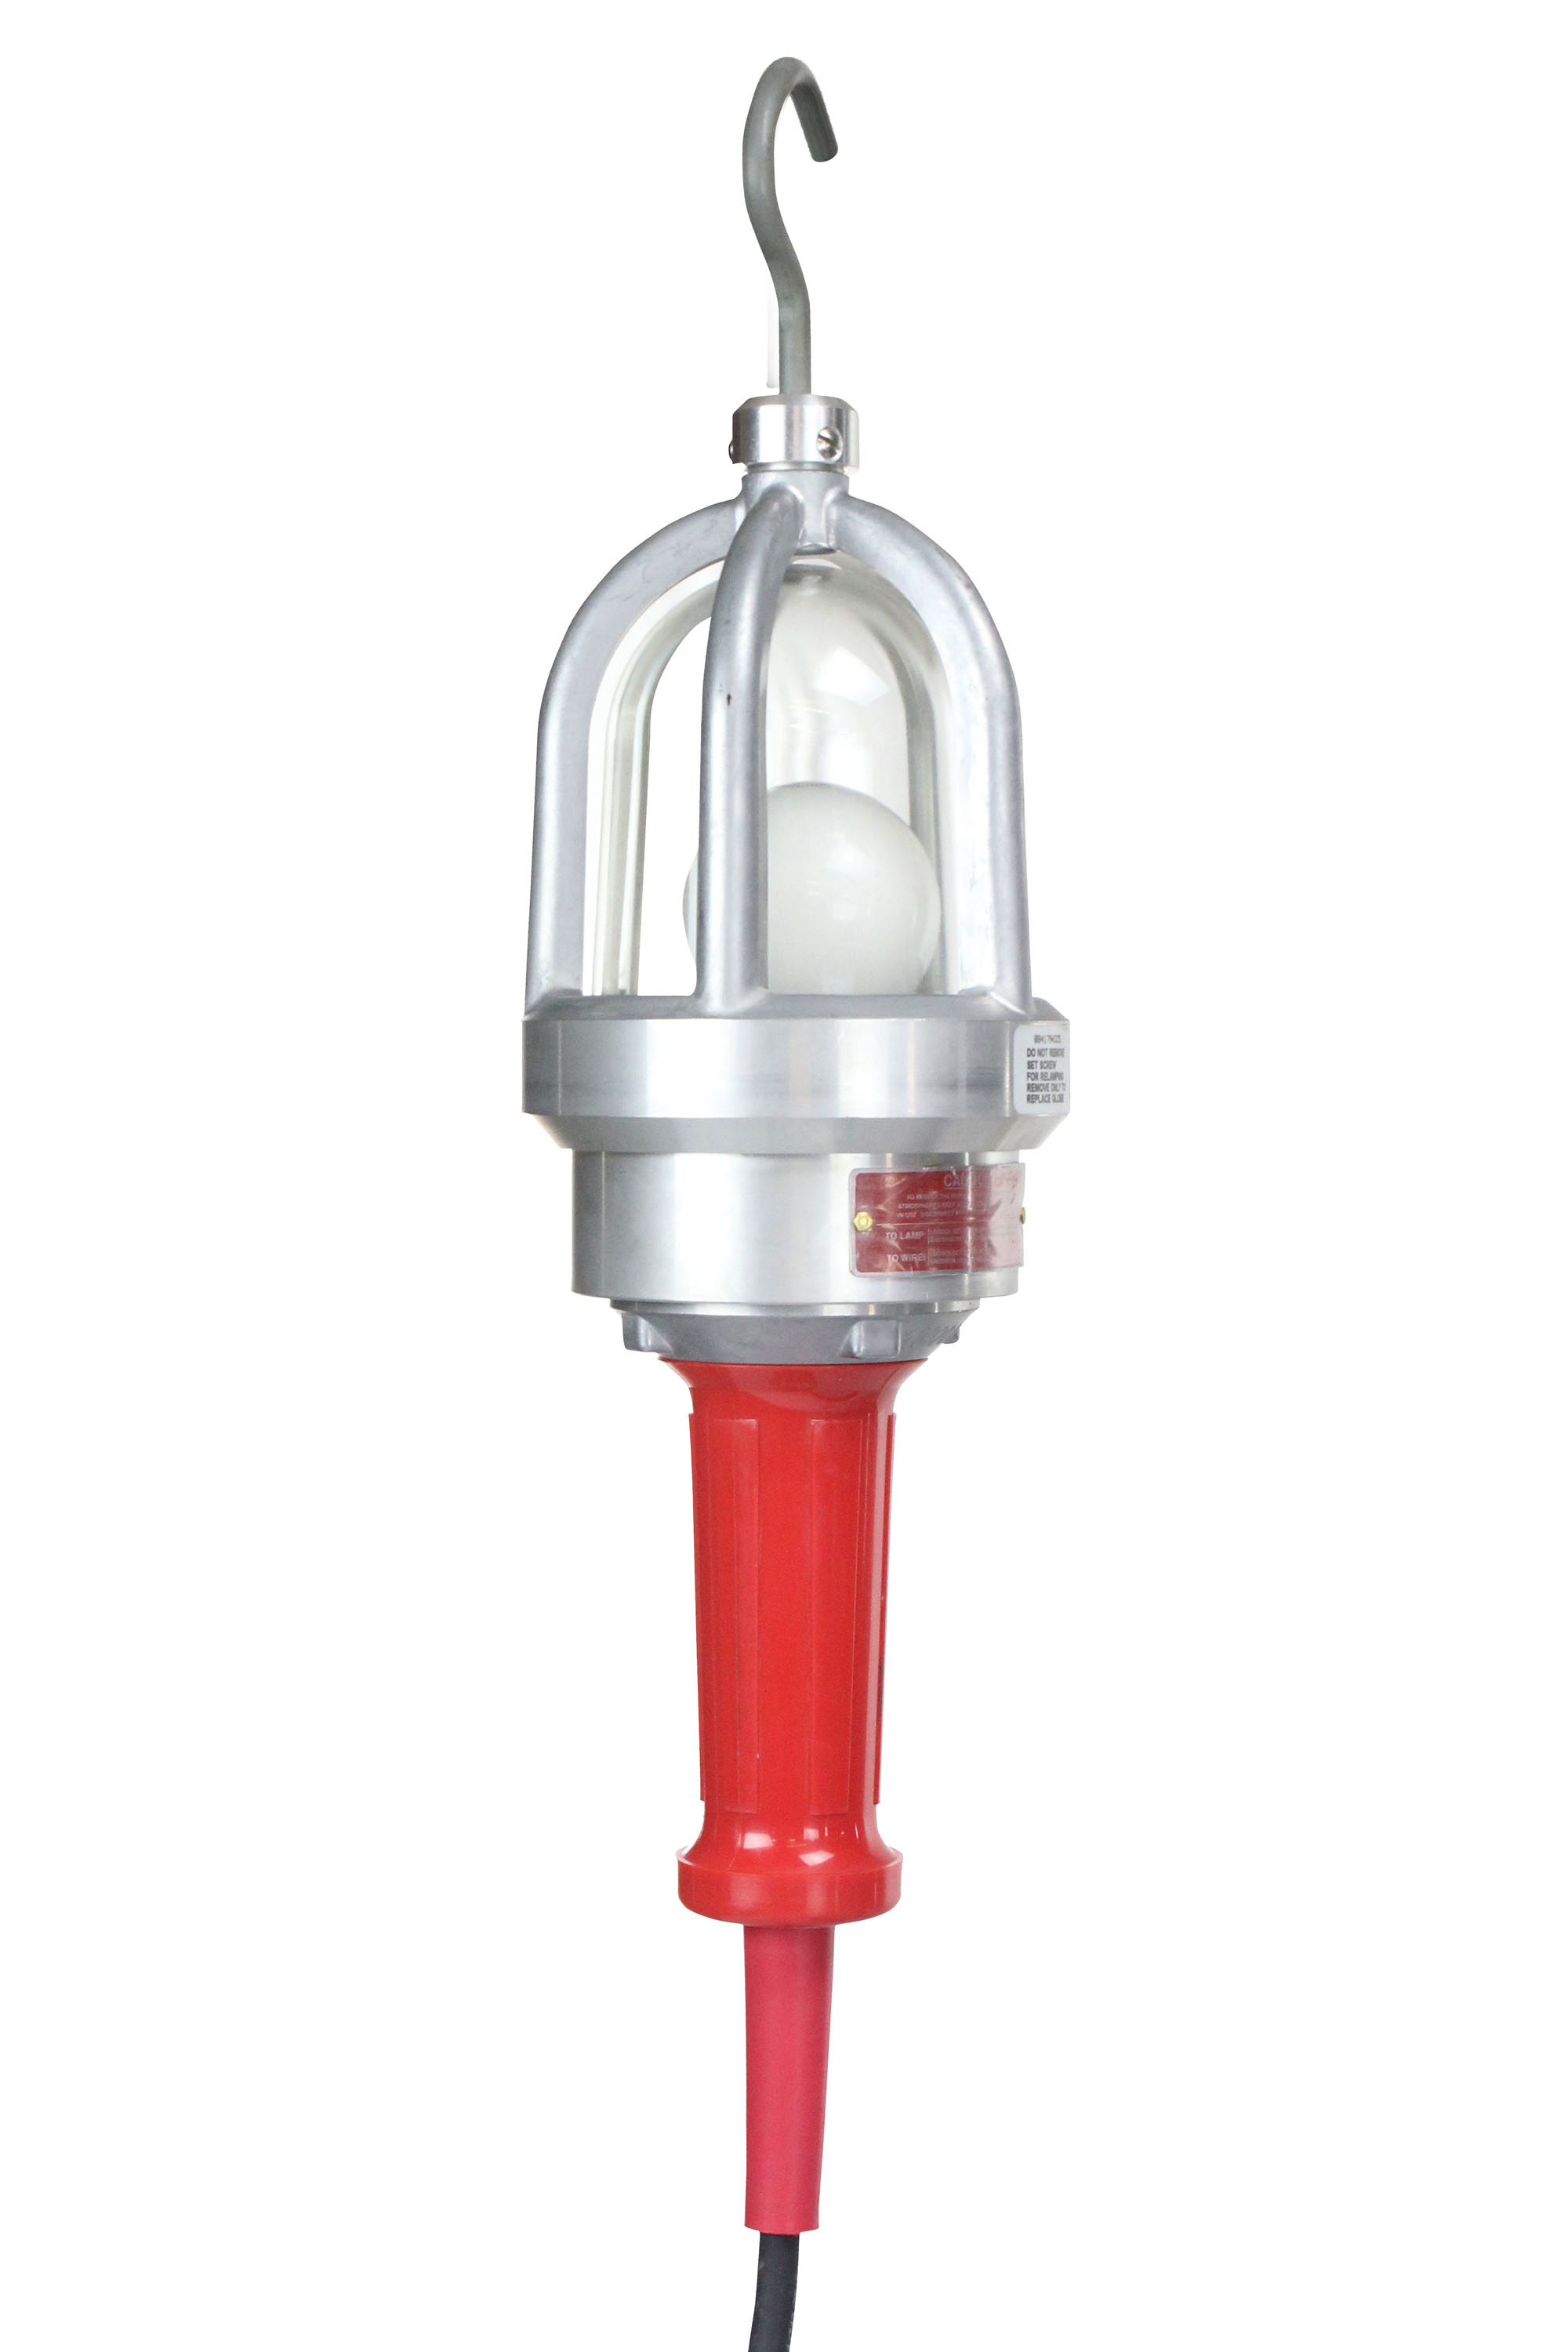 Explosion Proof Hand Lamp Equipped with 100' Cord